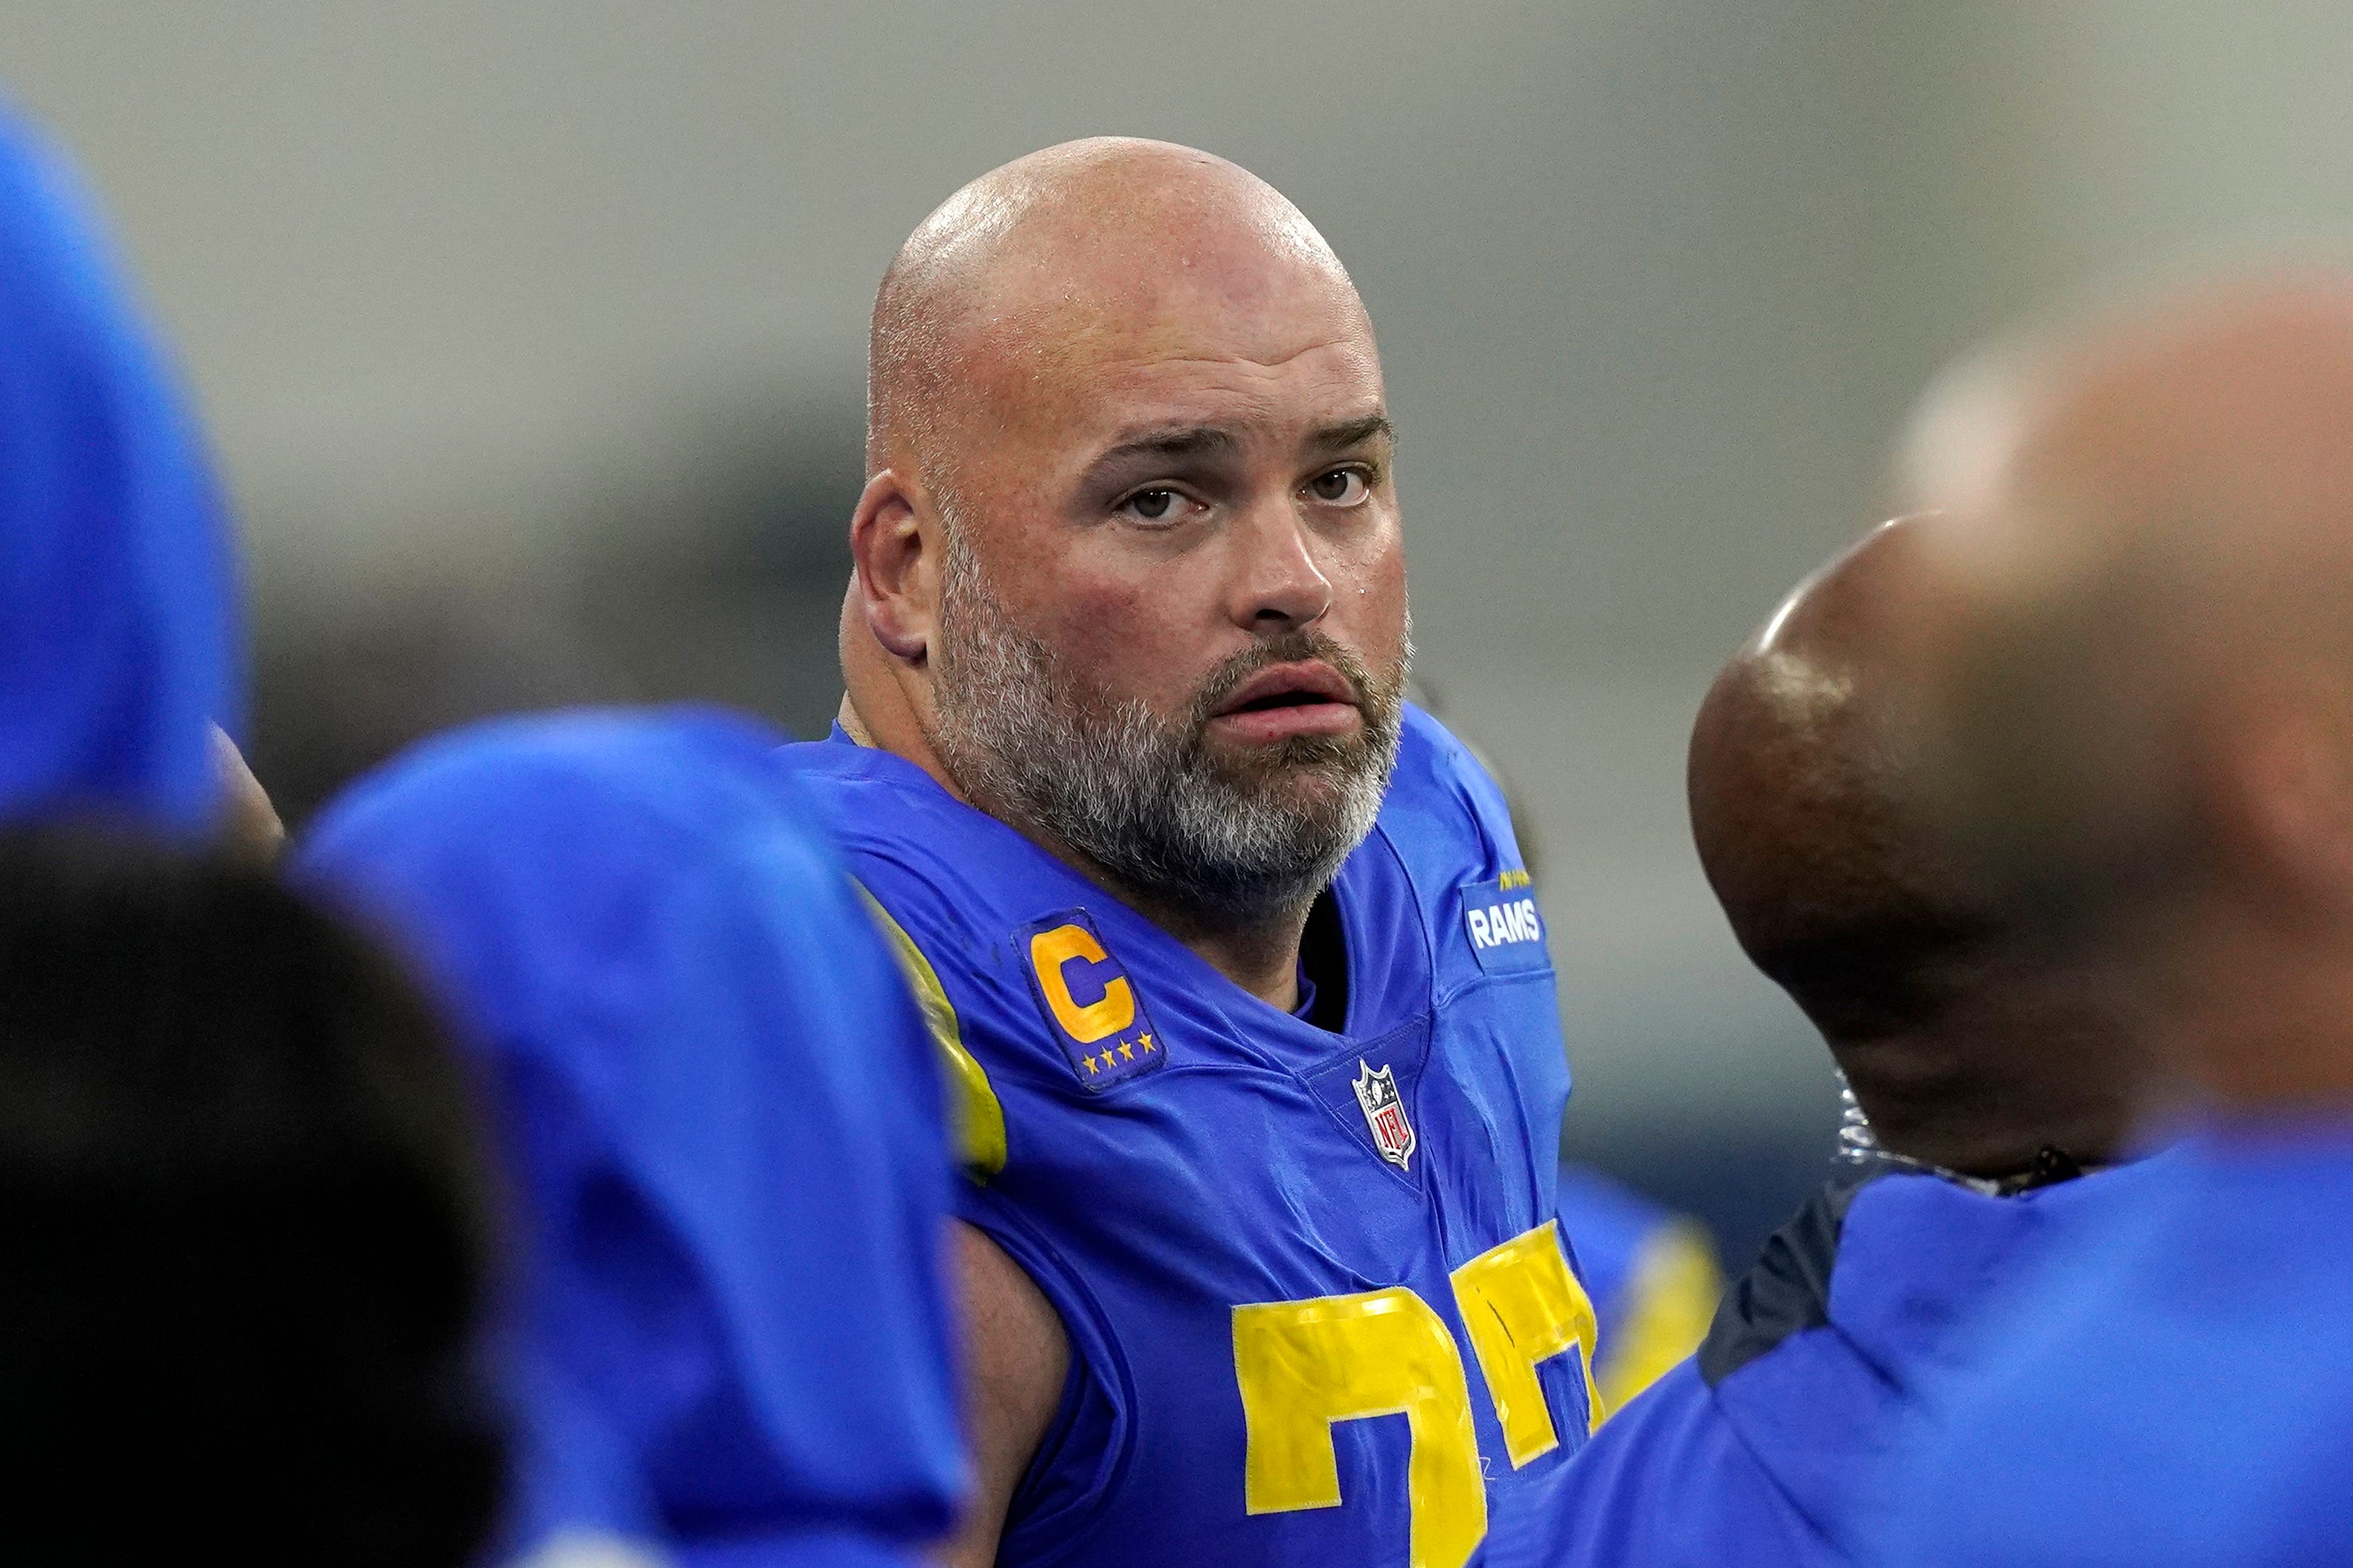 'Embarrassing for our game': Rams' Andrew Whitworth calls out former 49er Joe Staley for trolling his wife